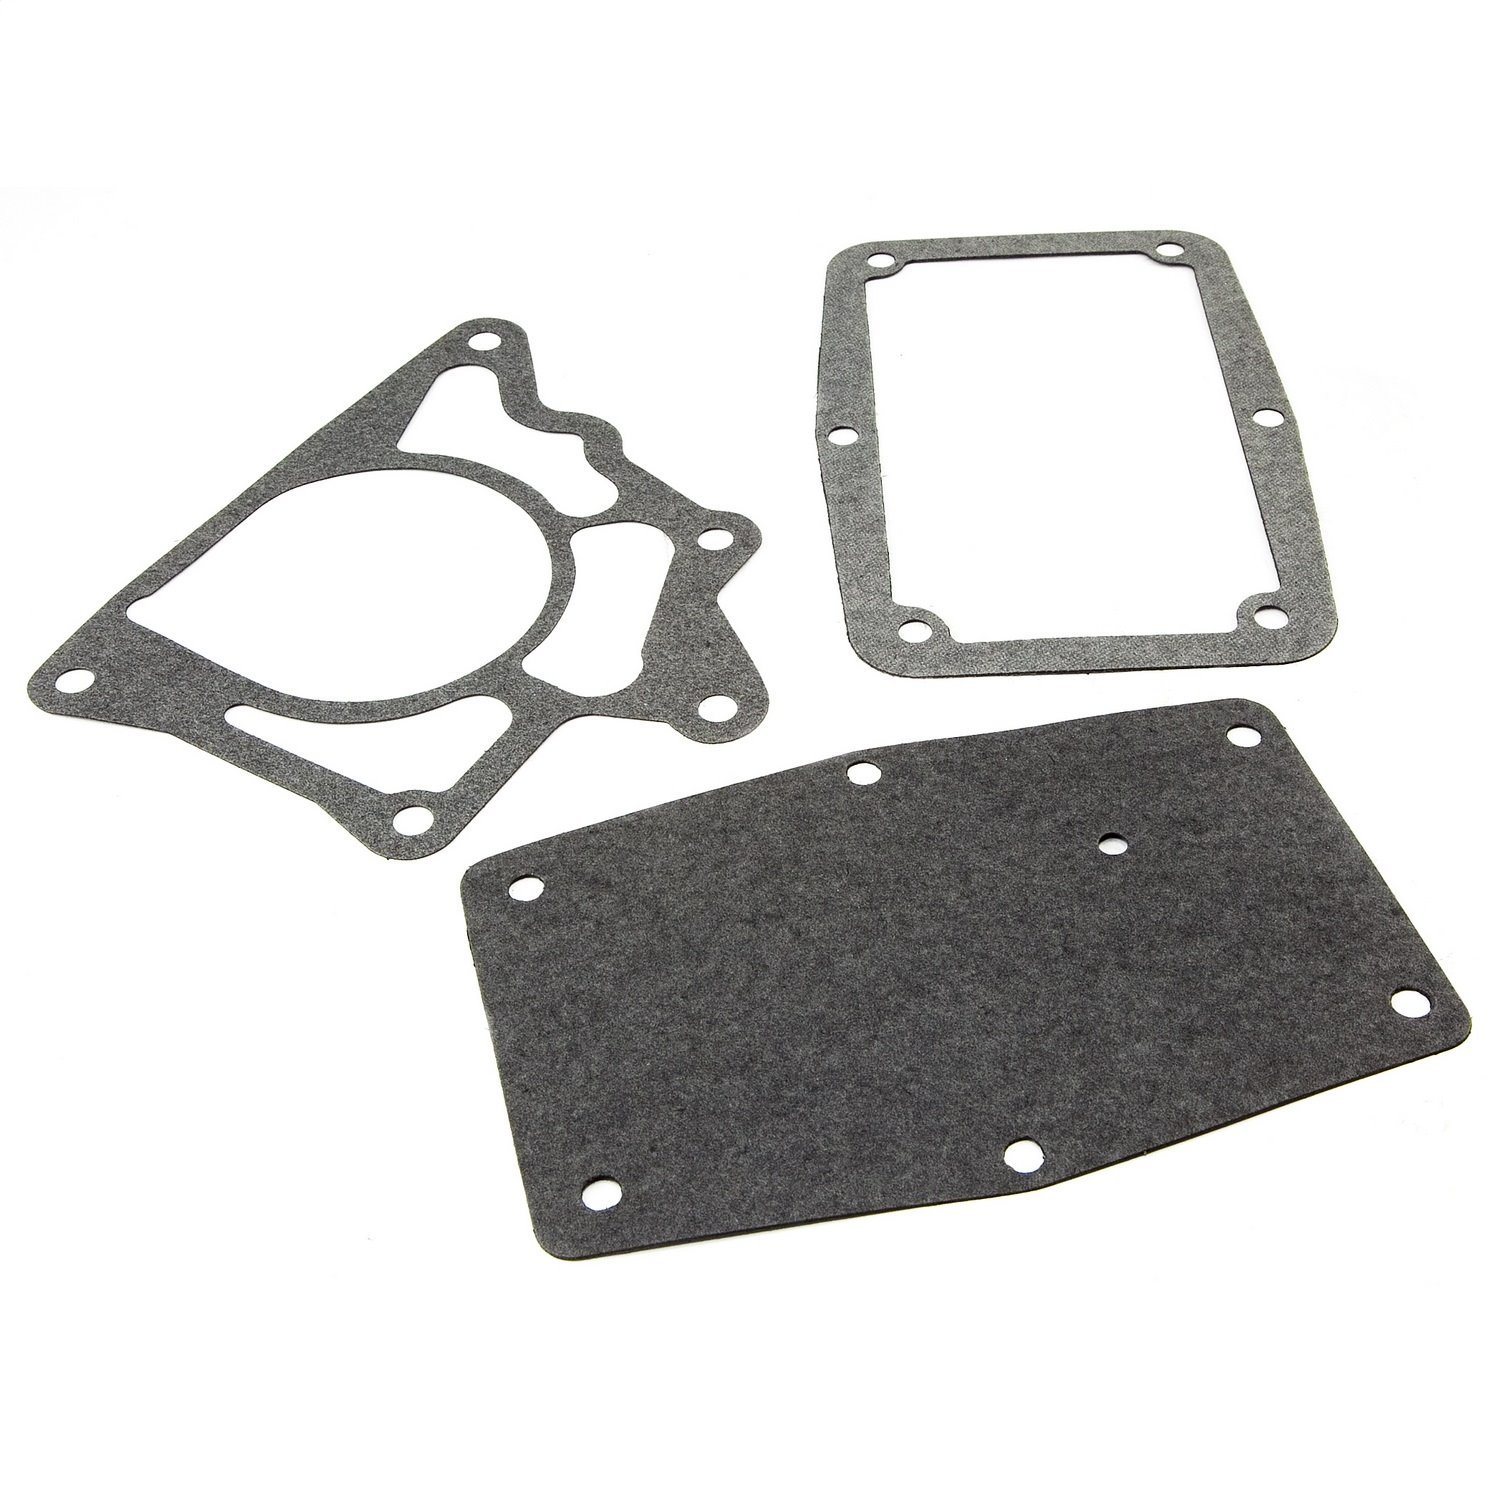 This 3-speed manual transmission seal kit from Omix-ADA fits 67-75 Jeep vehicles with the Warner T14 transmission.